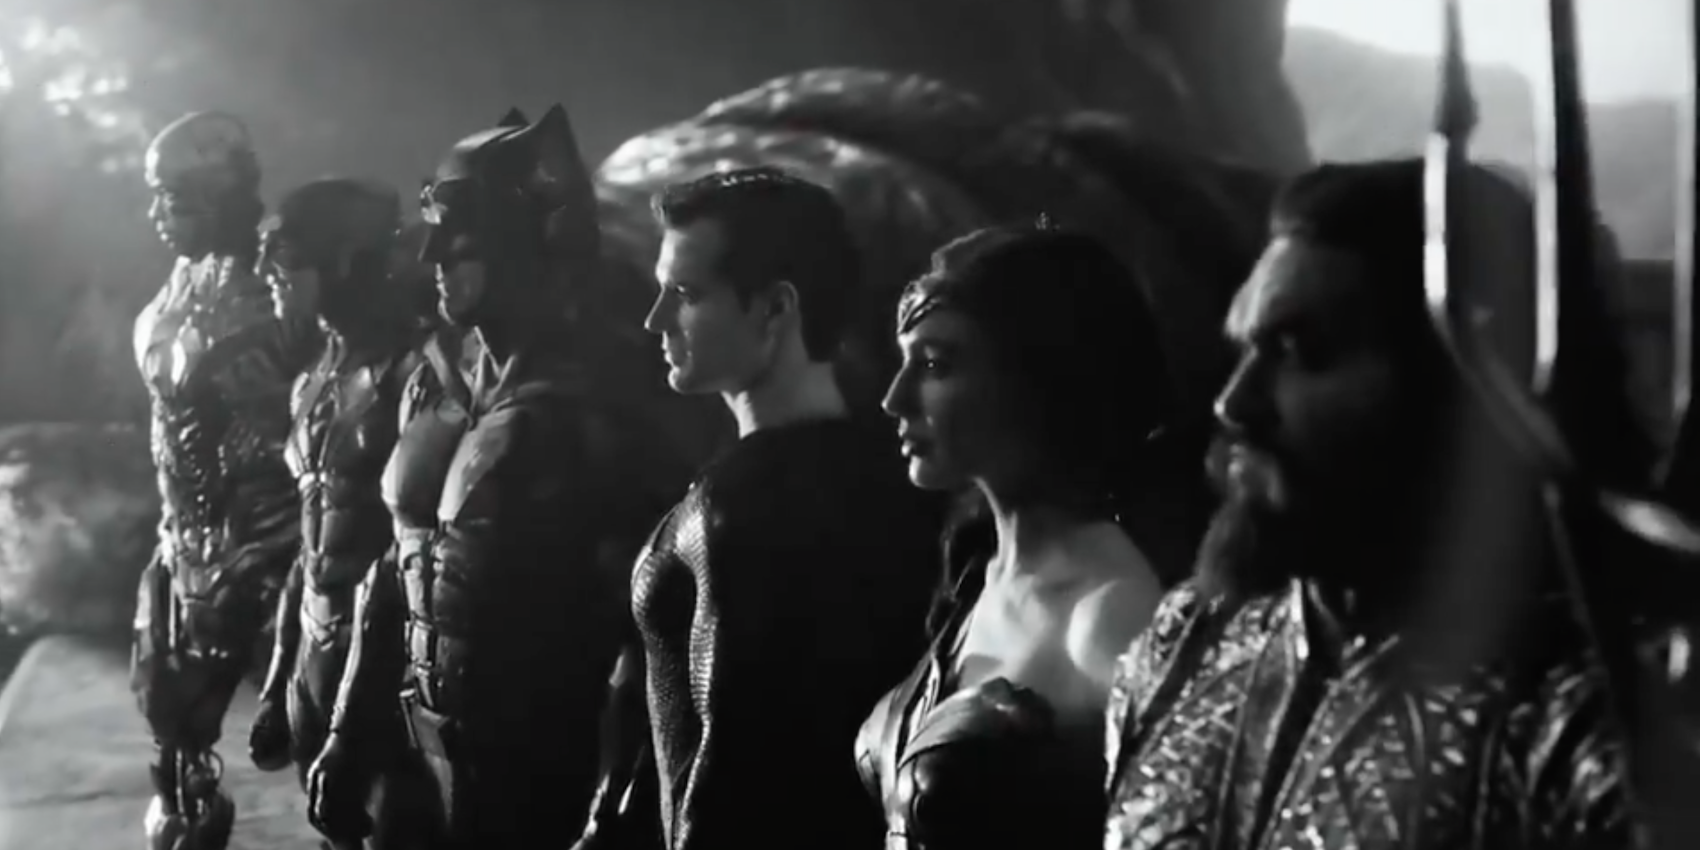 snyder-cut-hbo-max-trailer-black-and-white-social